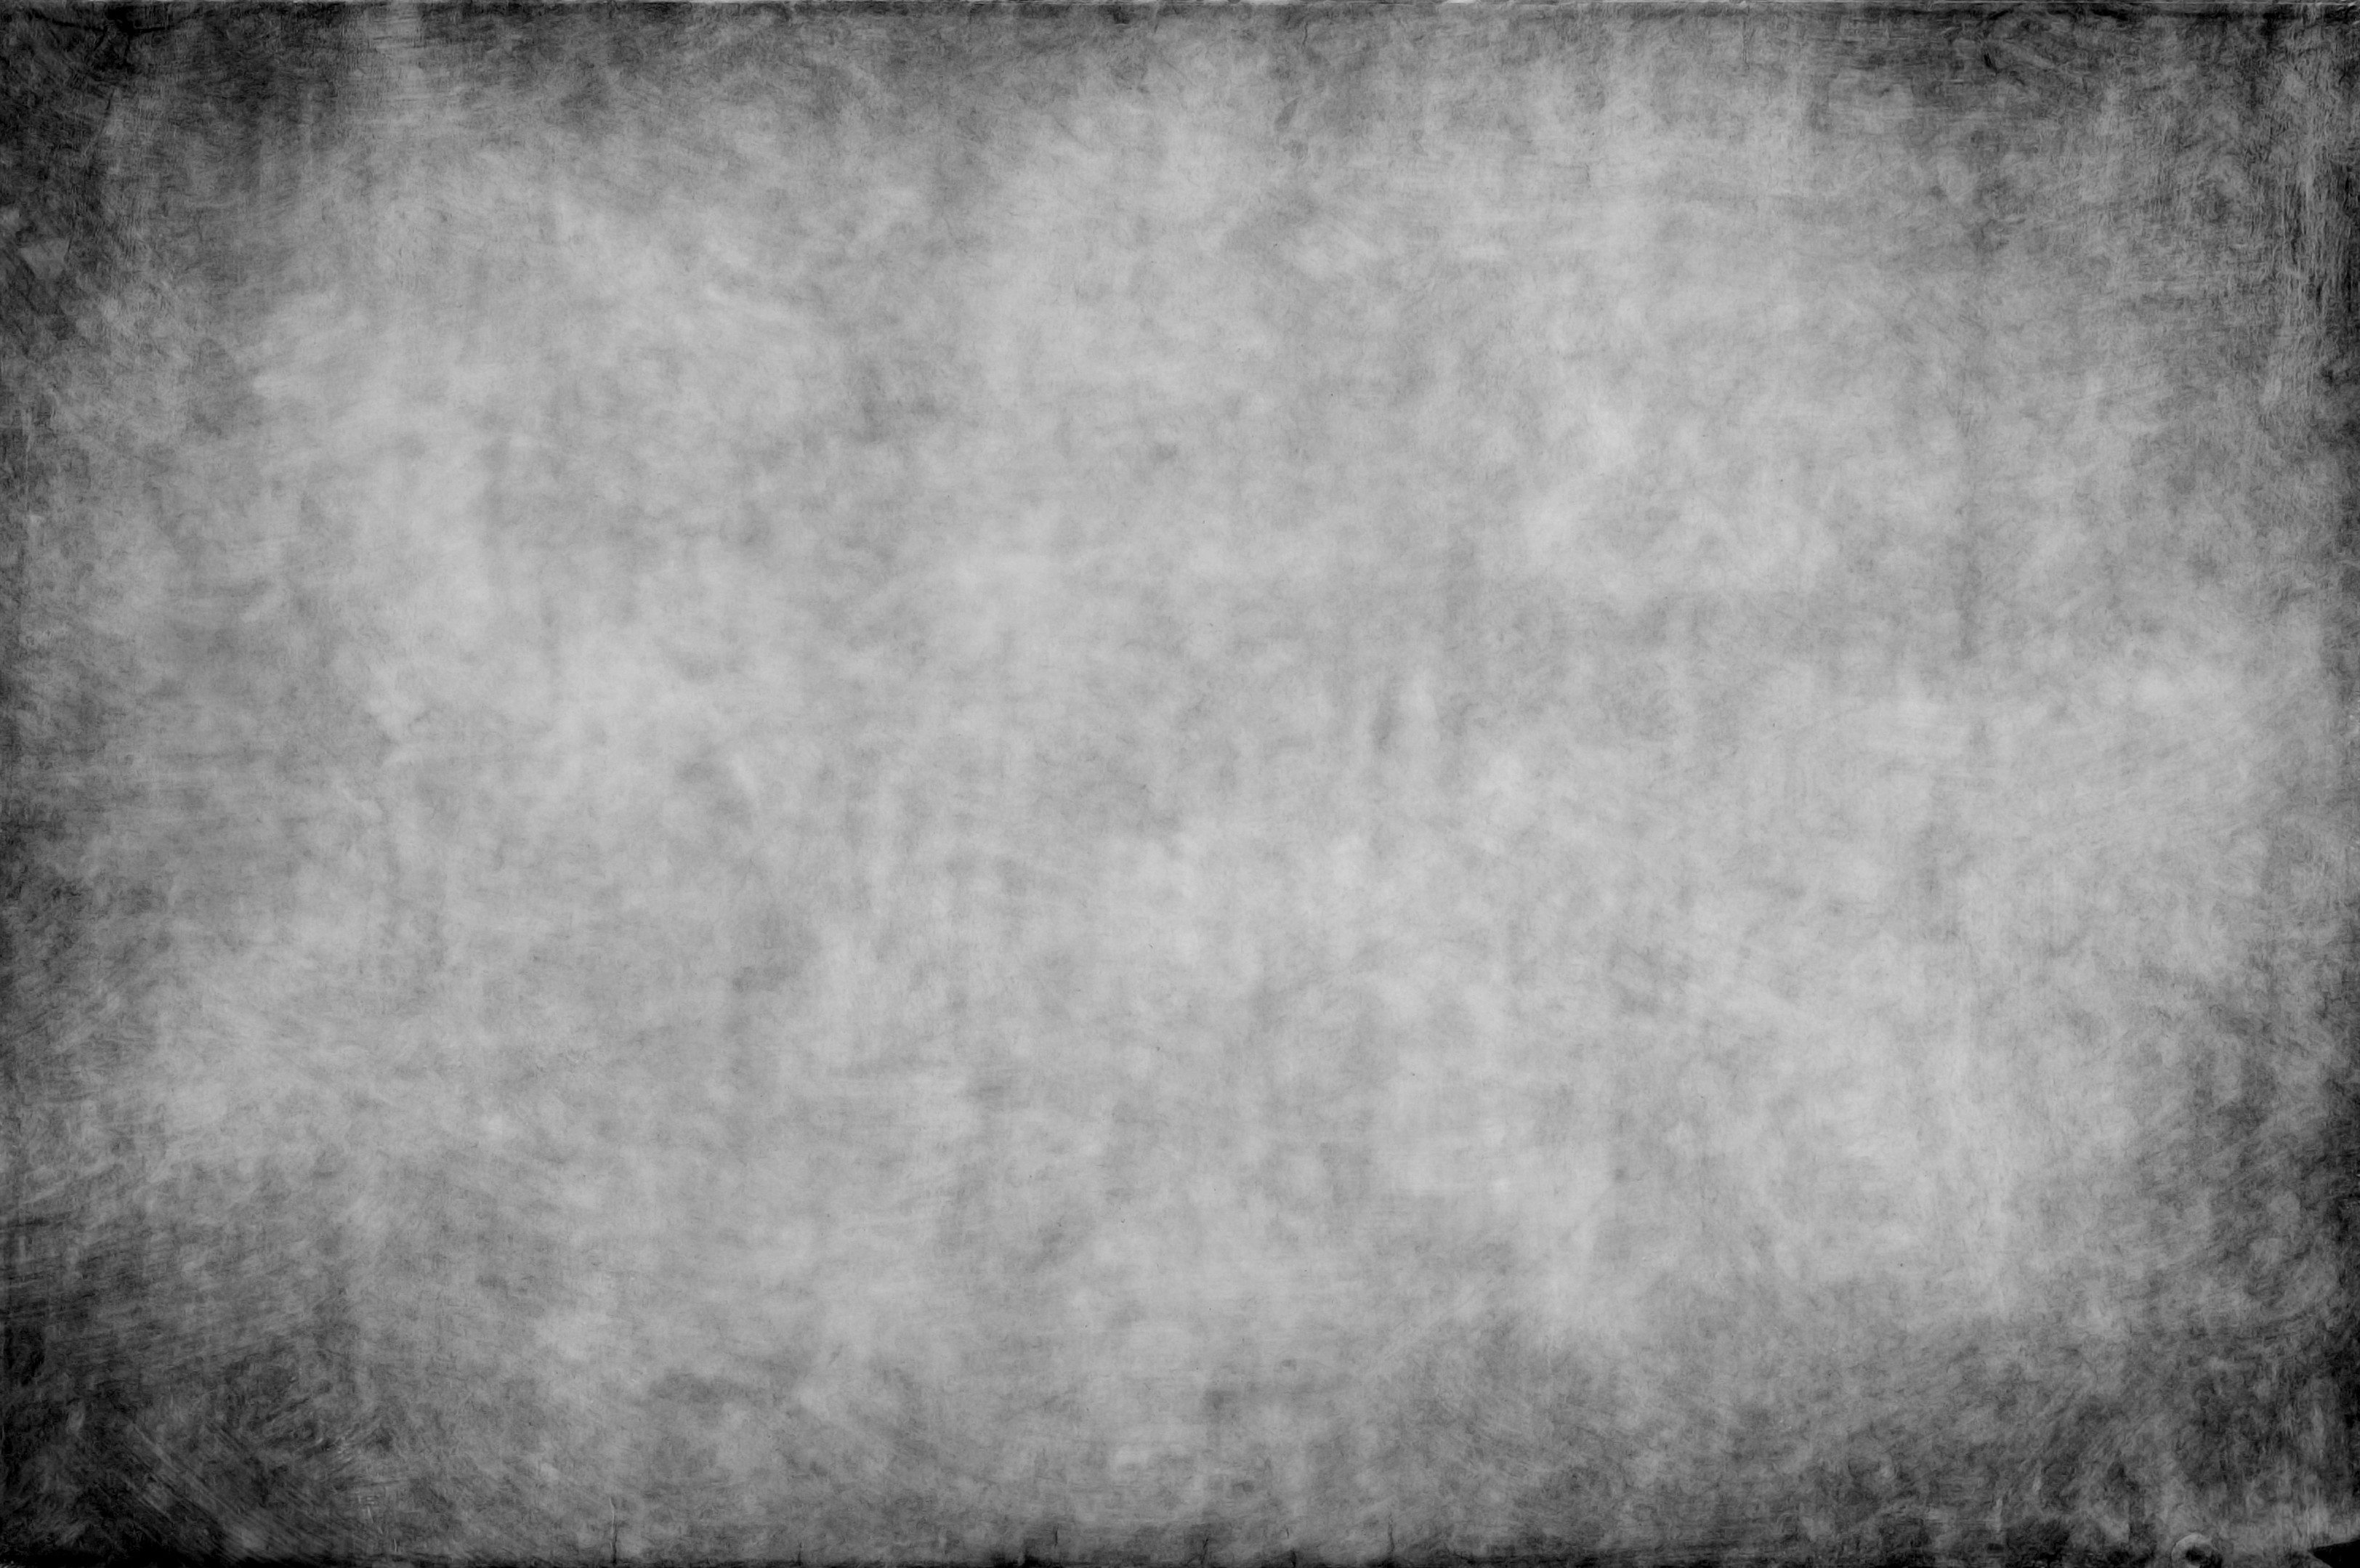 3248x2158 wallpaper.wiki-Black-And-Grey-Backgrounds-Desktop-PIC-